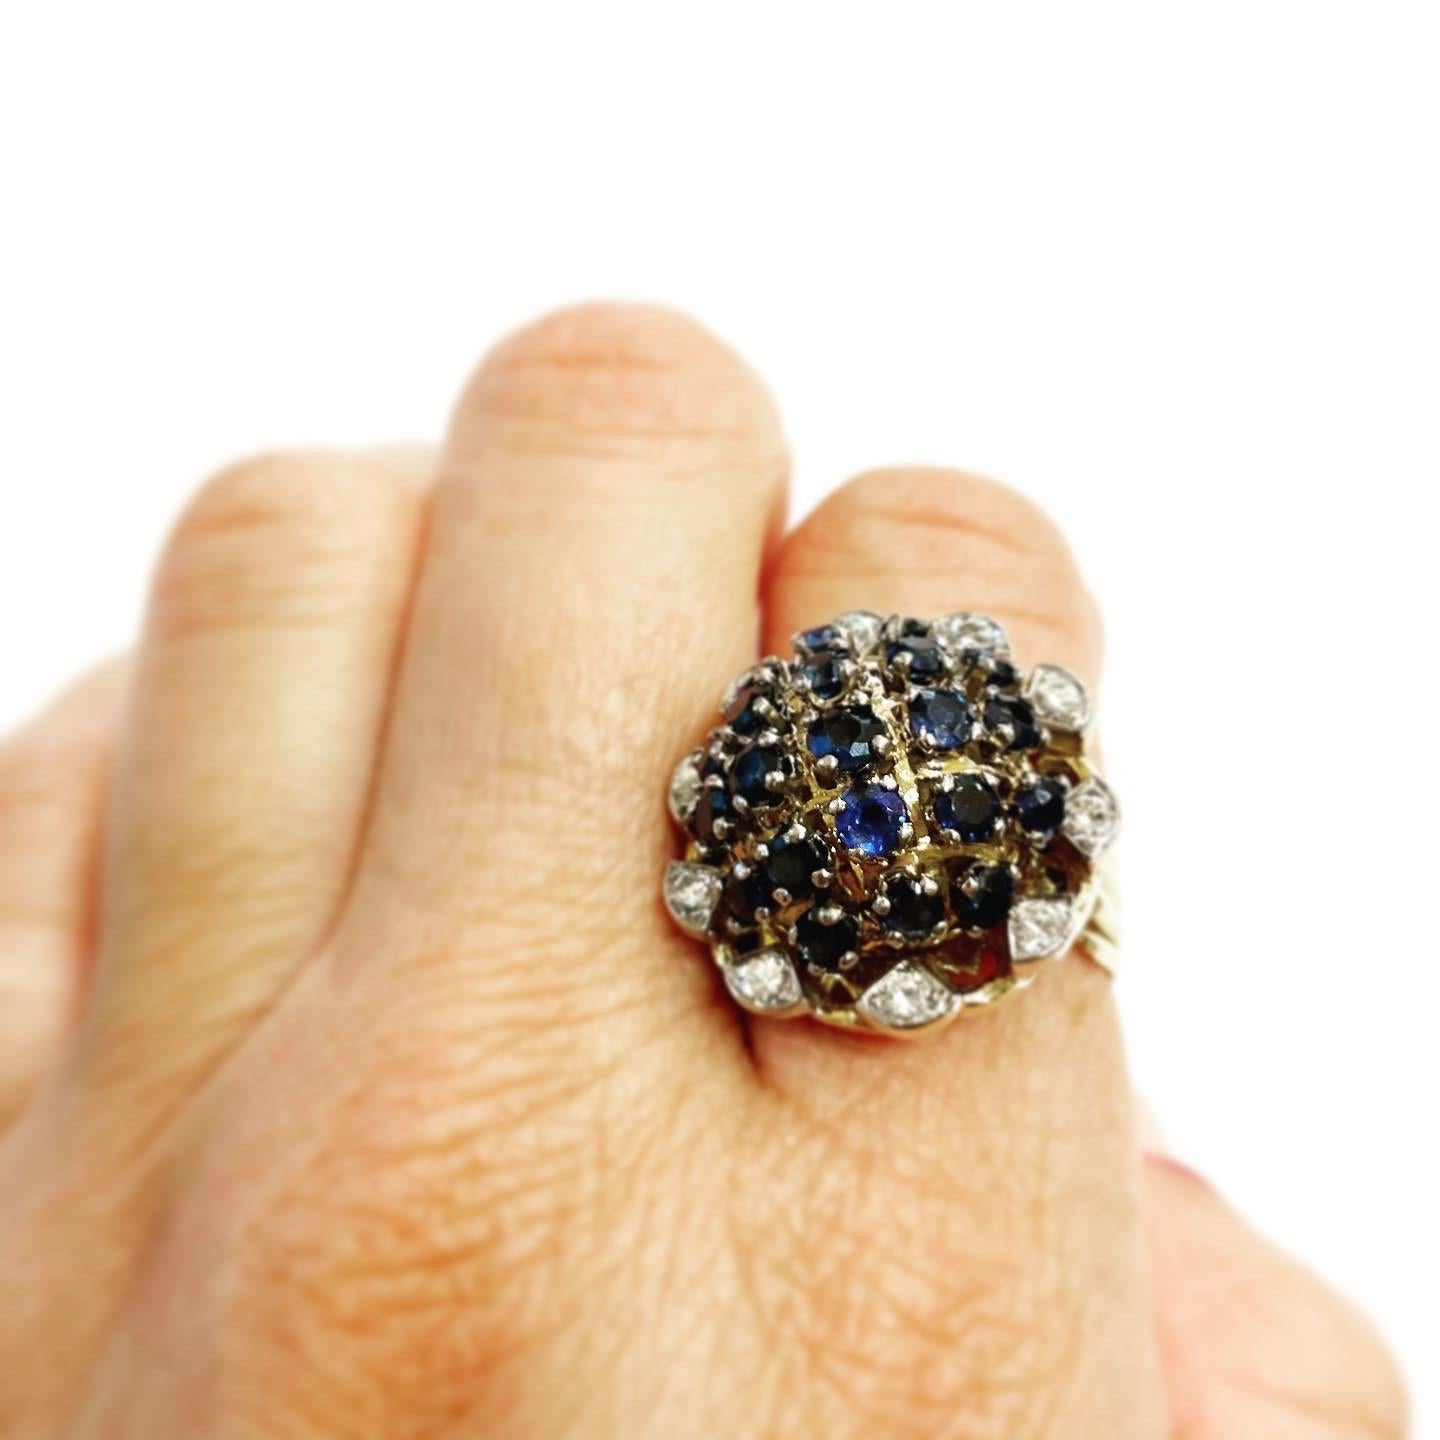 1950s Interchangeable 18kt Gold, Diamond, Pearls, Ruby, Sapphire Fashion Ring 7